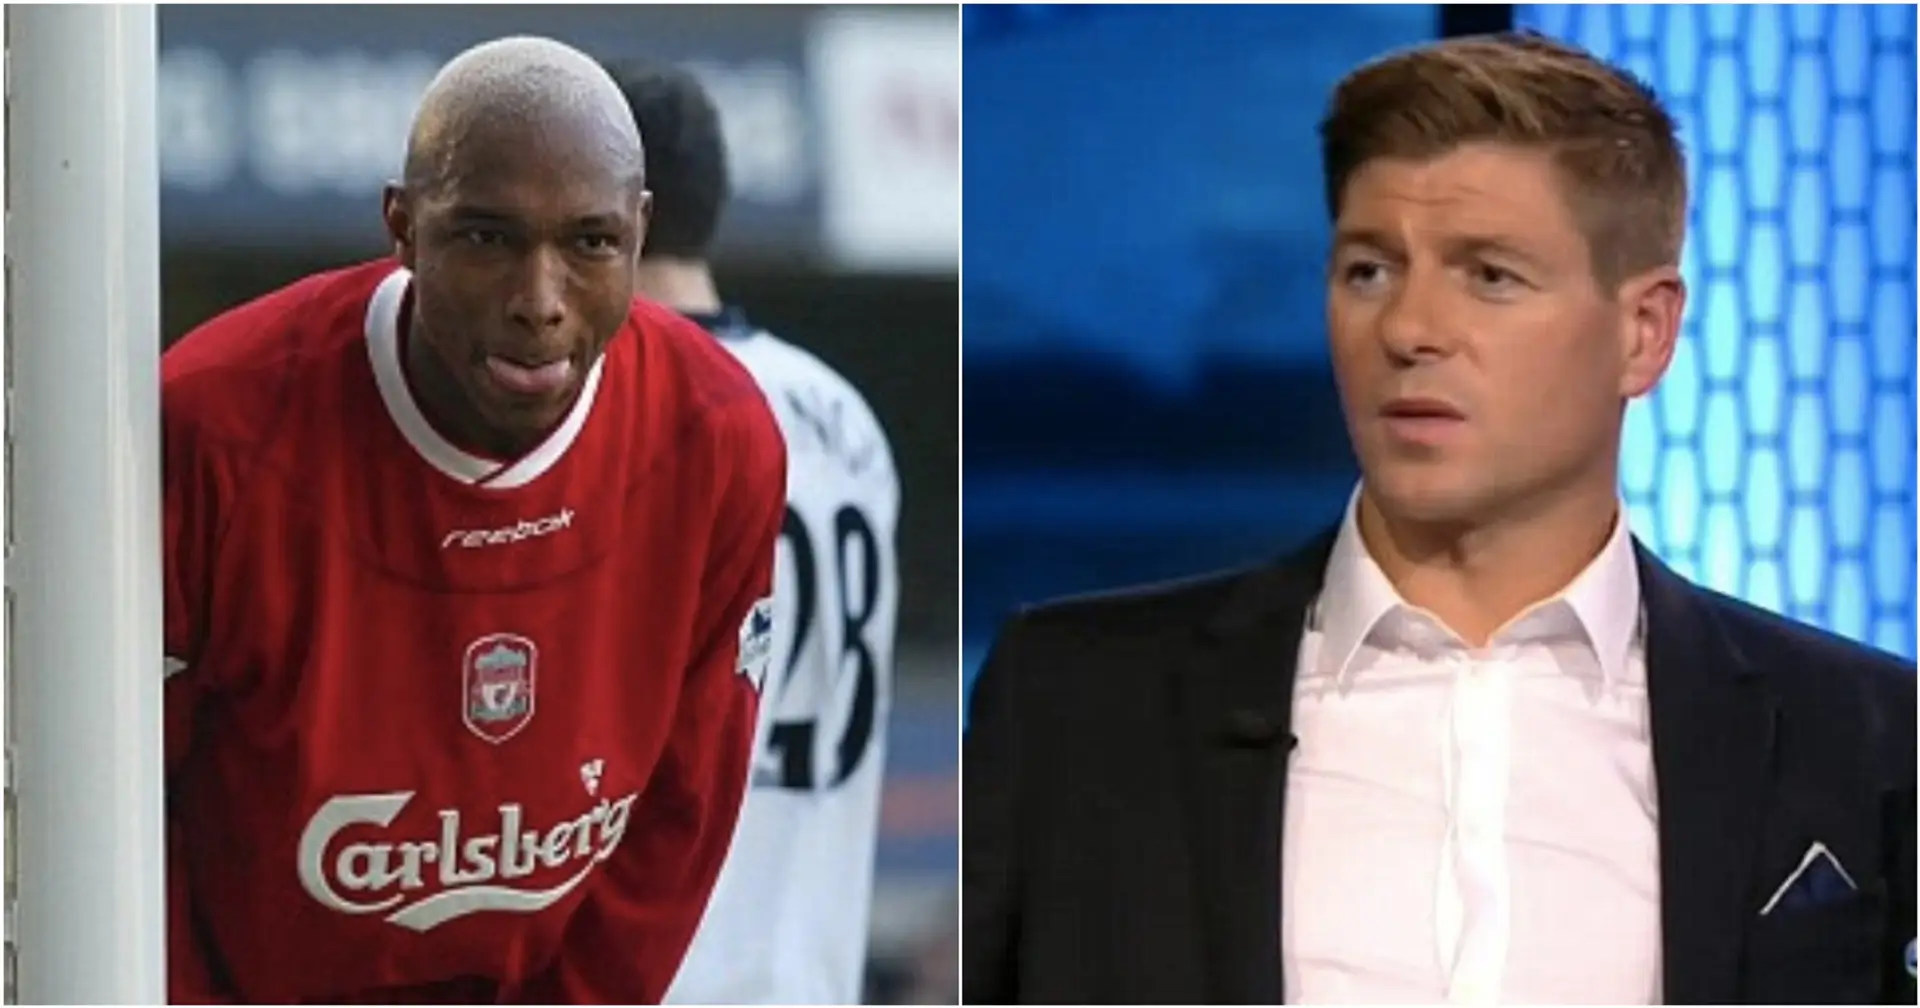 One time Steven Gerrard had to deny he is racist — all about Liverpool's worst-ever signing